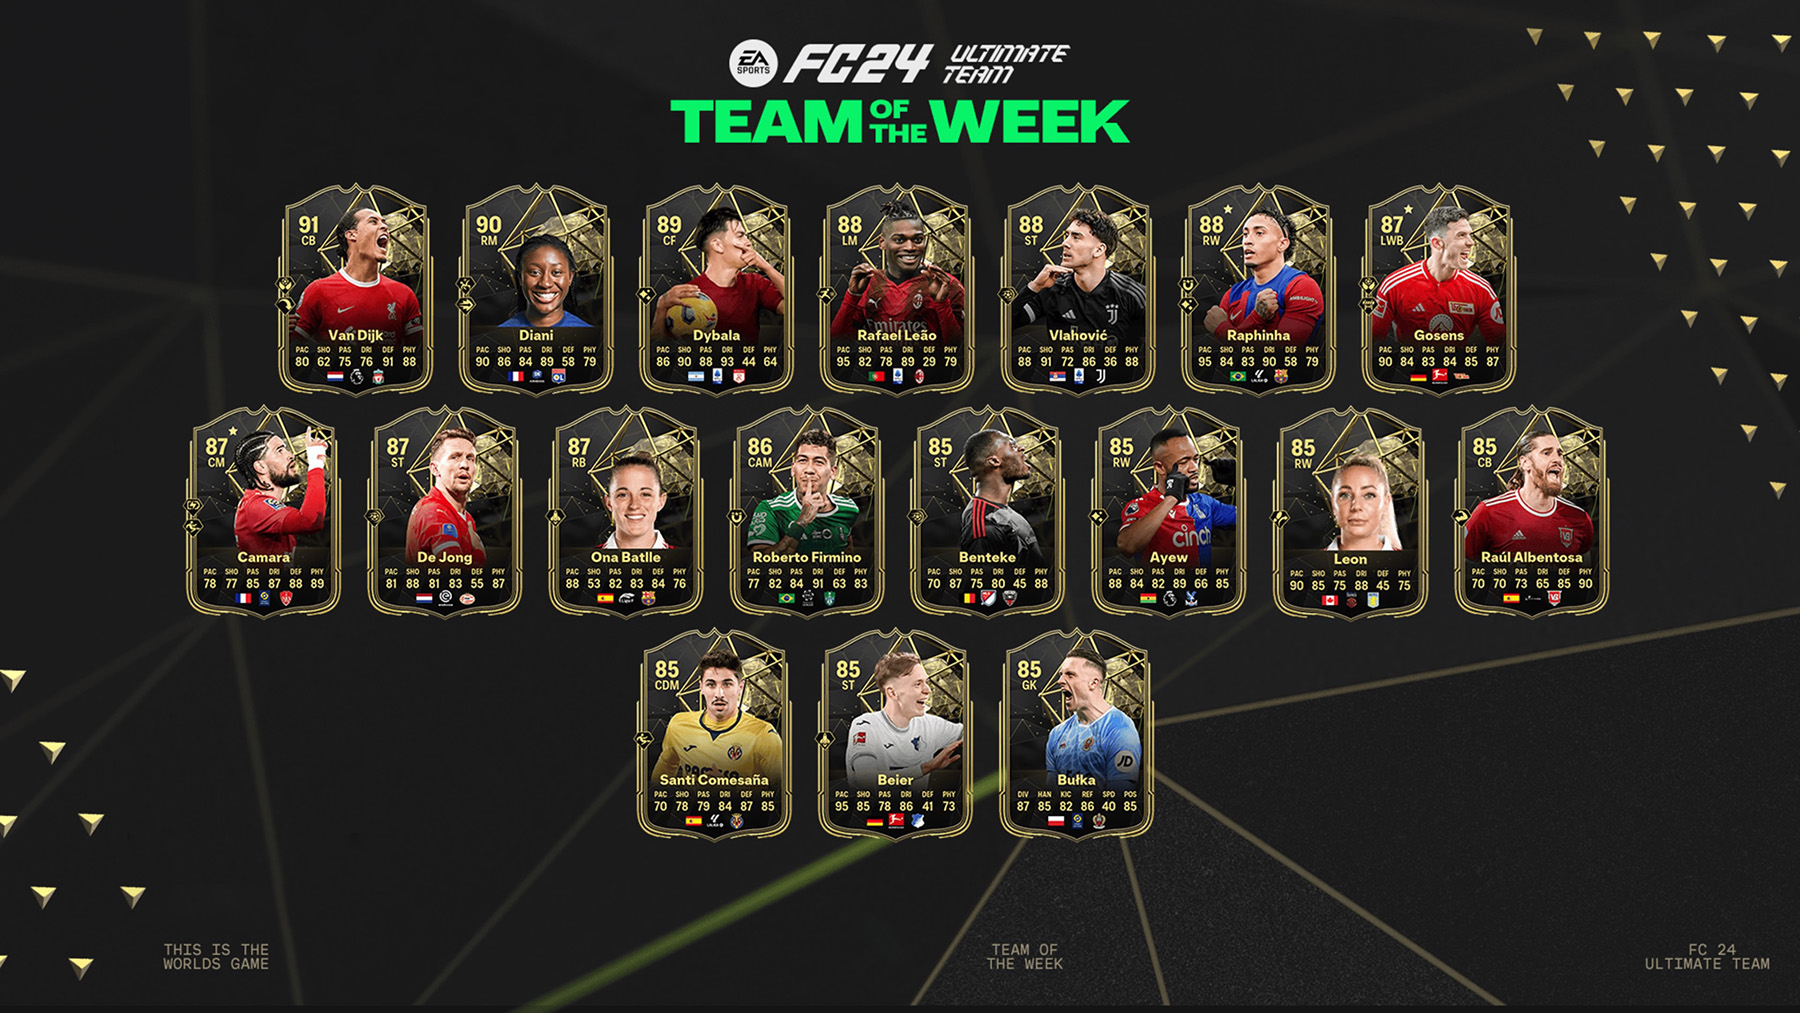 EA Sports FC 24 Team of the Week 24 is available from 28 Feb (6pm UK).